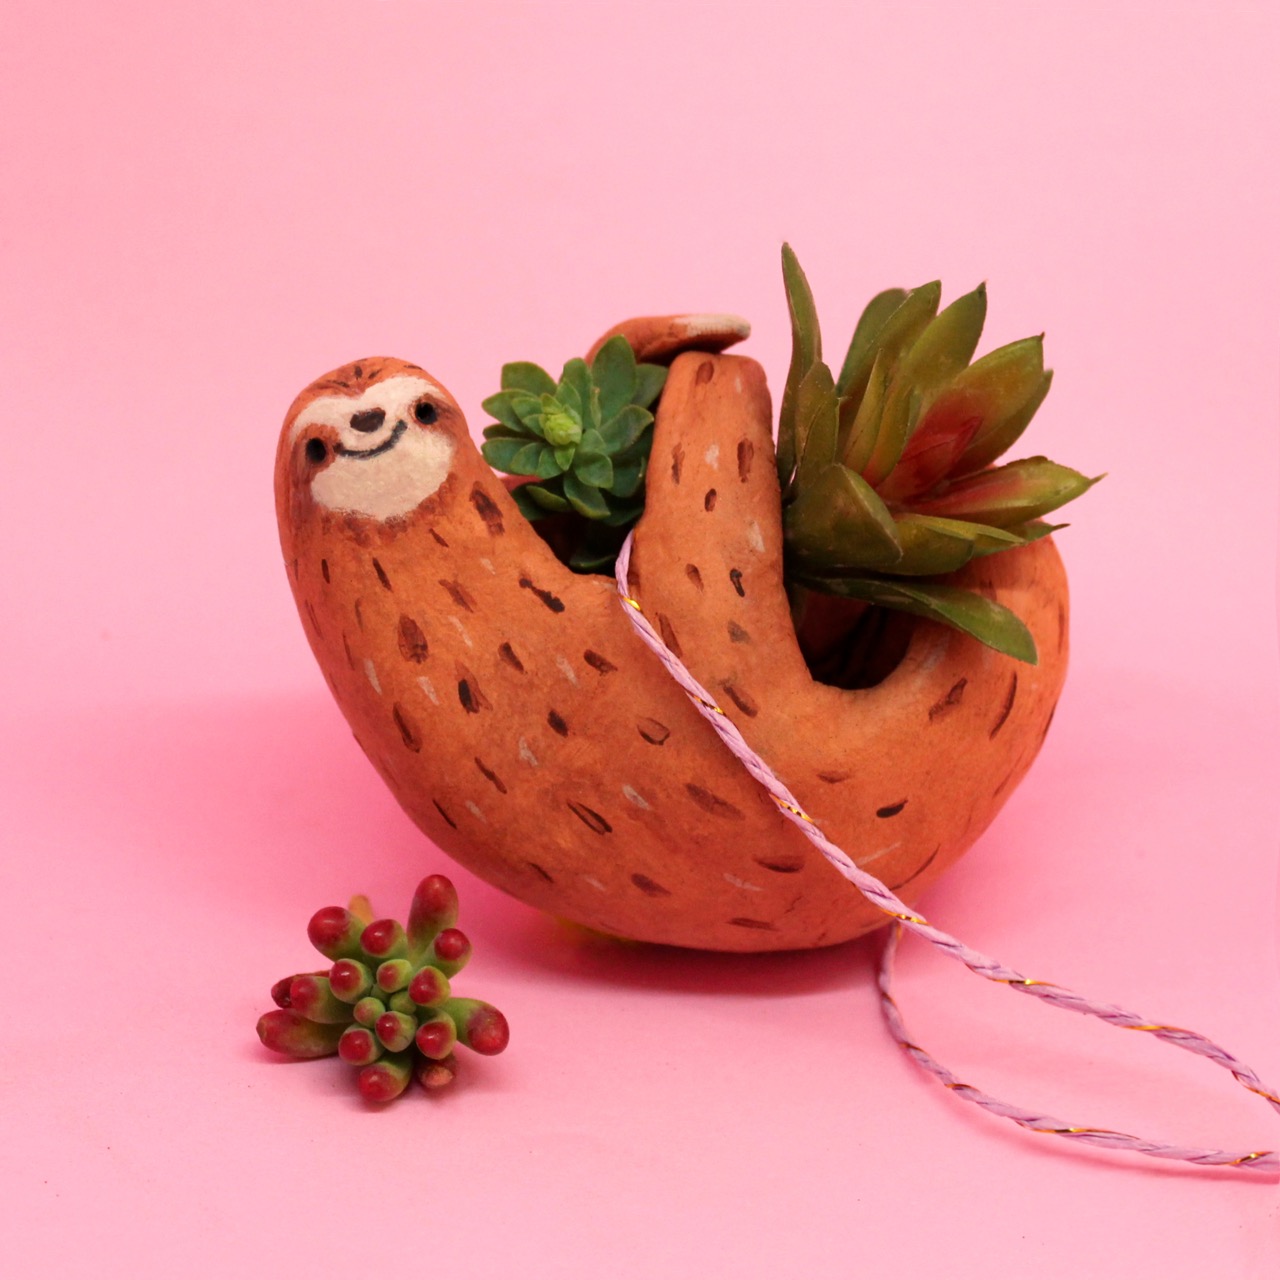 Bring nature into your house with this easy homemade sloth planter